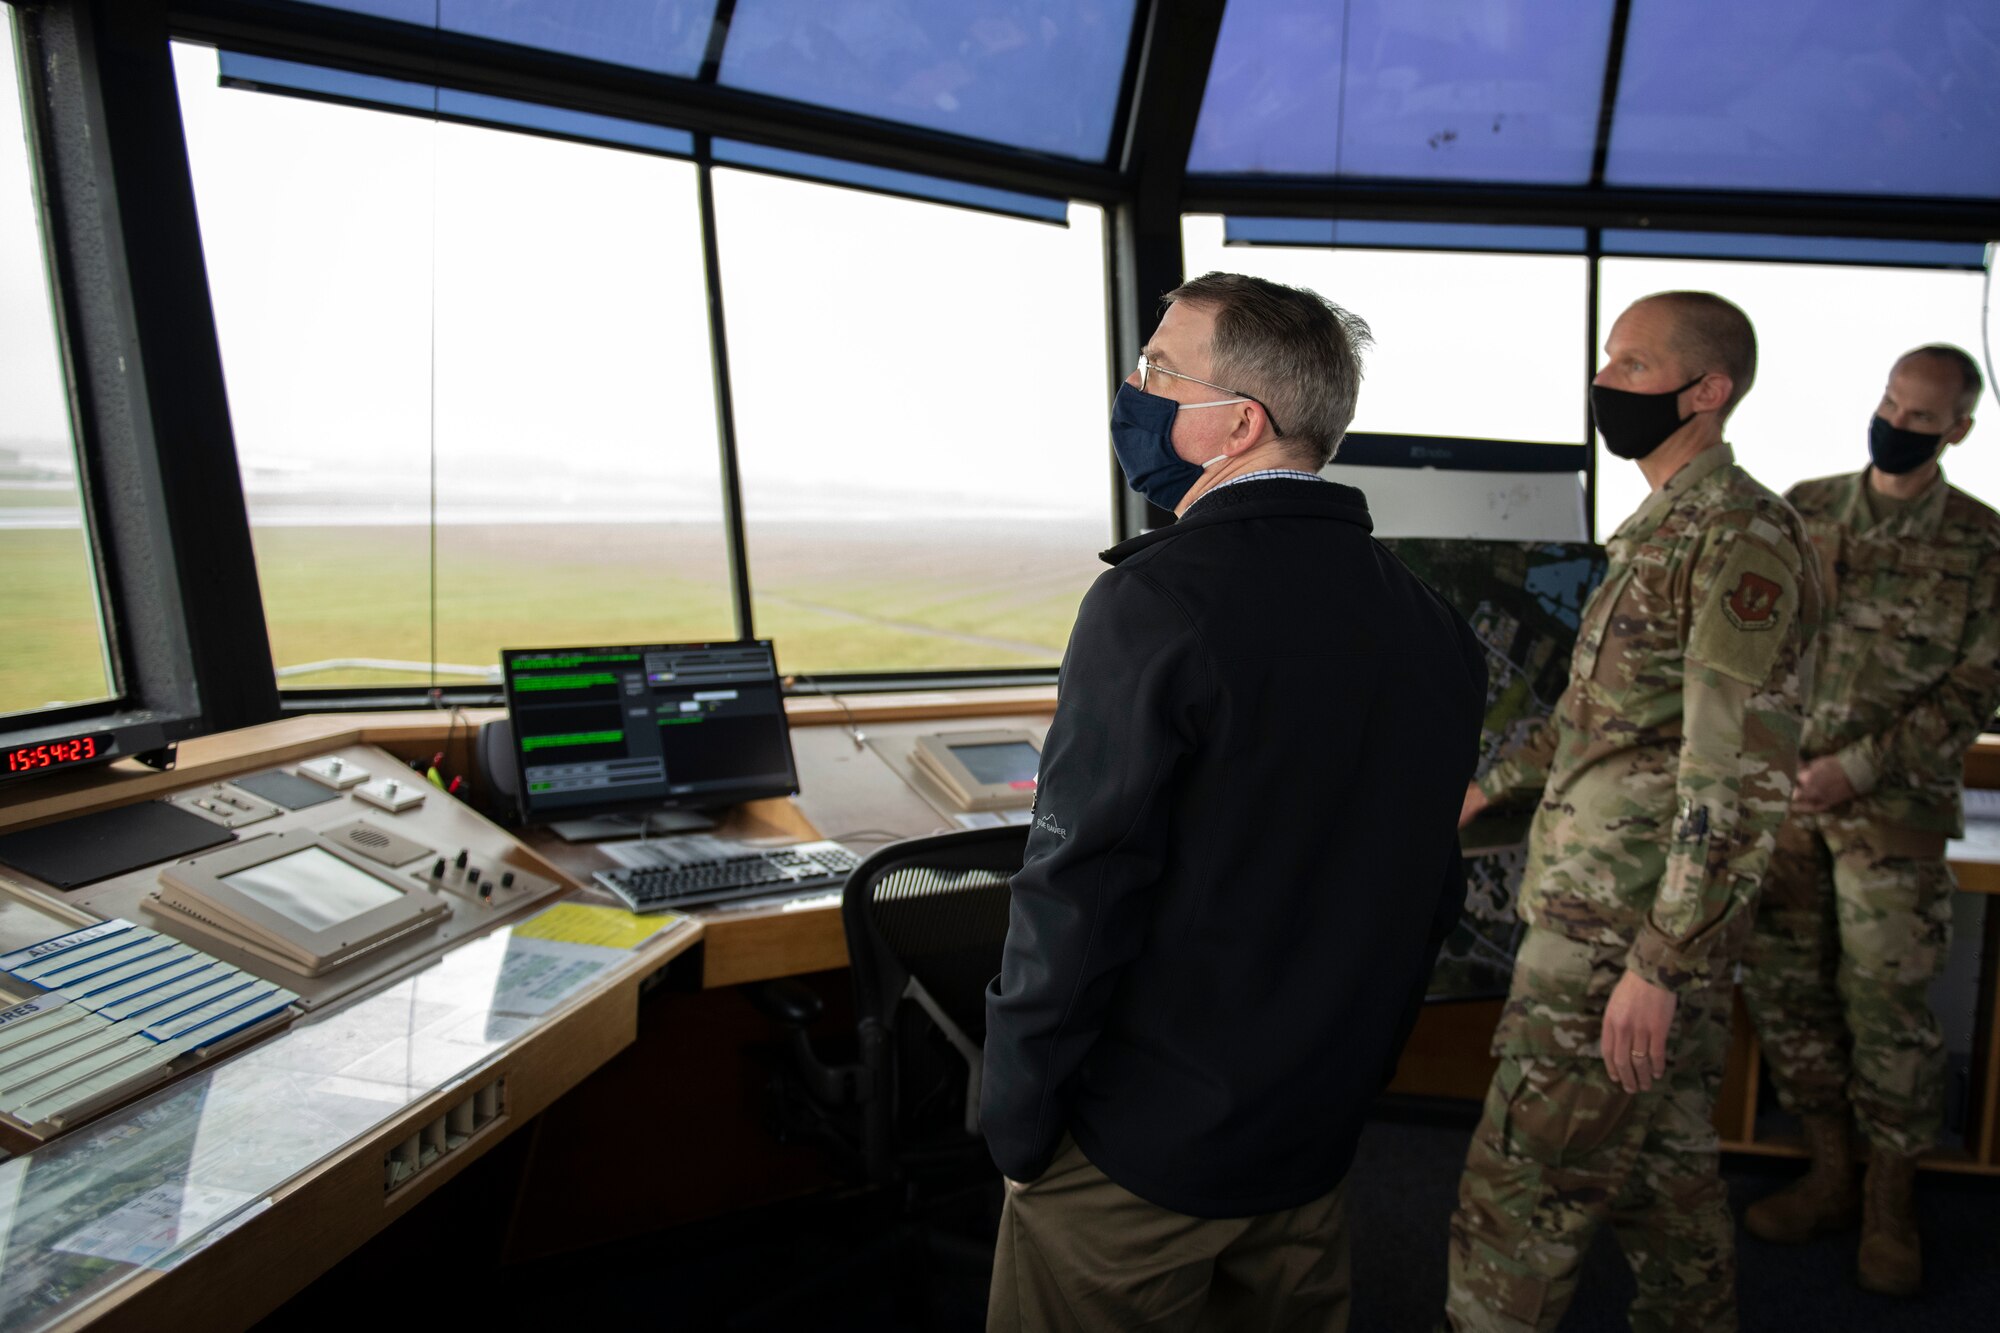 Deputy Secretary of Defense David L. Norquist, left, U.S. Air Force Lt. Col. Joseph Knothe, center, 420th Air Base Squadron commander, and Brig. Gen. Jefferson J. O'Donnell, right, U.S. European Command Senior Defense Official and Defense Attaché, discuss the runway and future construction plans at RAF Fairford, England, Oct. 12, 2020.  The RAF Fairford aircraft runway is the longest military runway in the U.K. The visit highlighted the strategic importance of RAF Fairford, oriented him to the bomber and ISR missions in support of U.S. European Command and national defense strategy, and gave him the opportunity to engage with Airmen. (U.S. Air Force photo by Senior Airman Jennifer Zima)